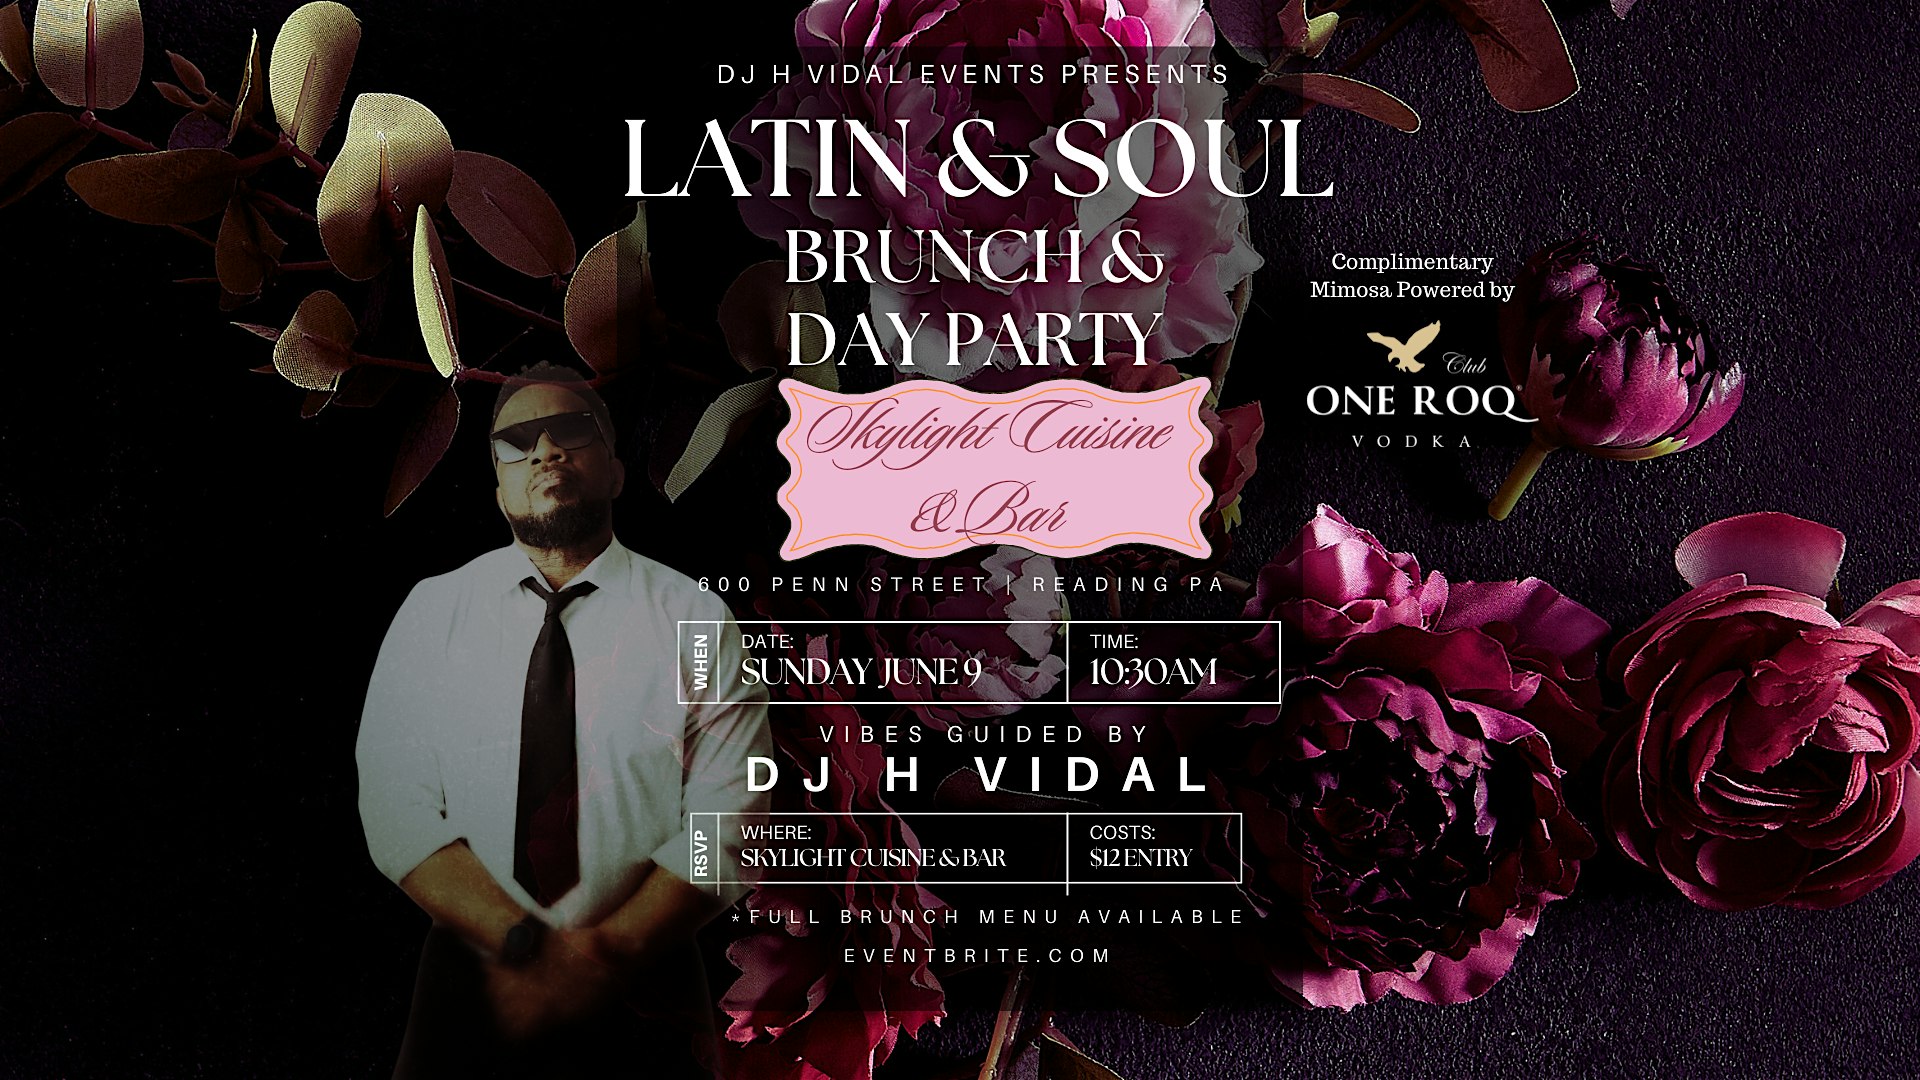 The Latin & Soul Brunch and Day Party